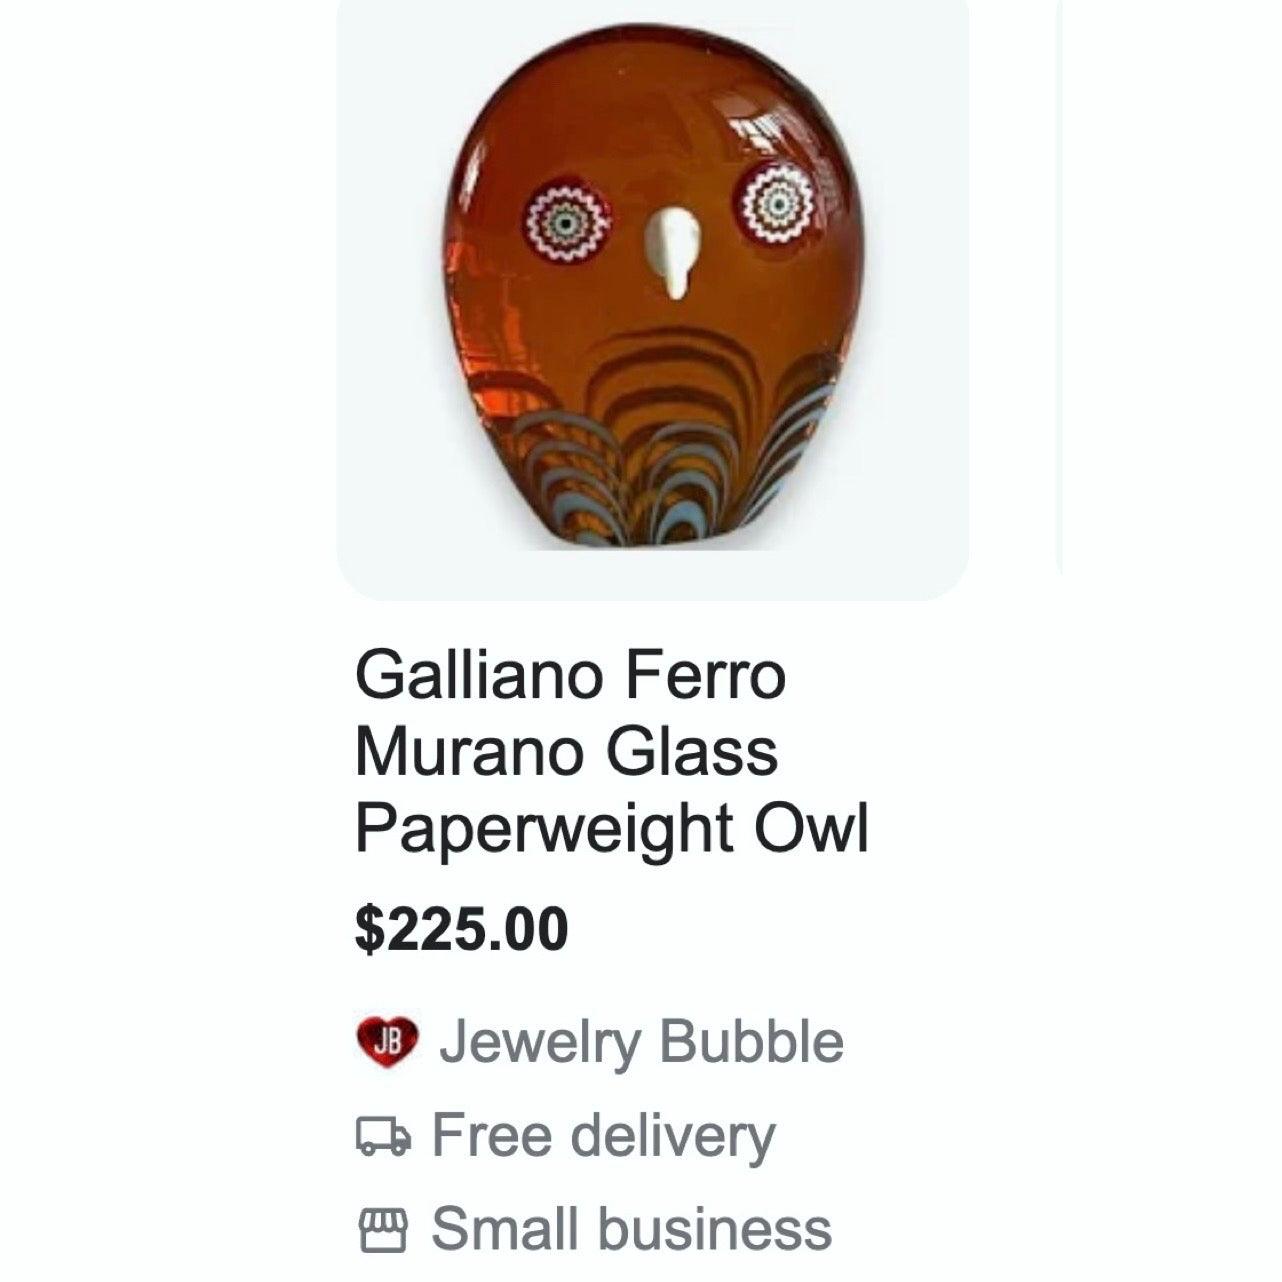 The Enchanting Artistry of the Galliano Ferro Murano Glass Owl Paperweight